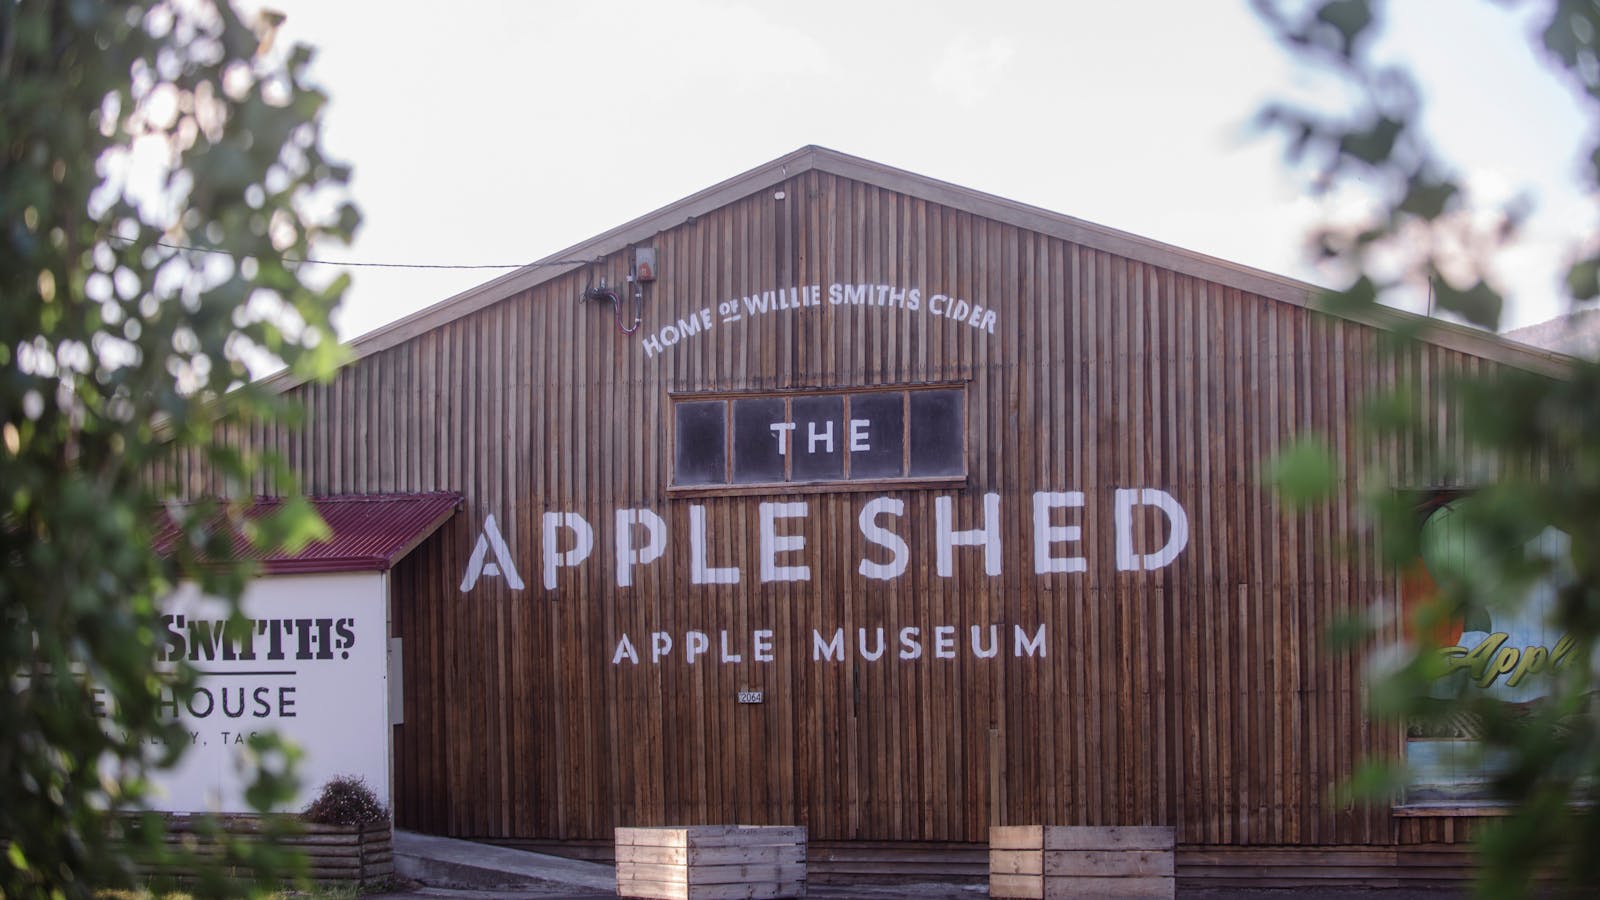 The Willie Smith's Apple Shed